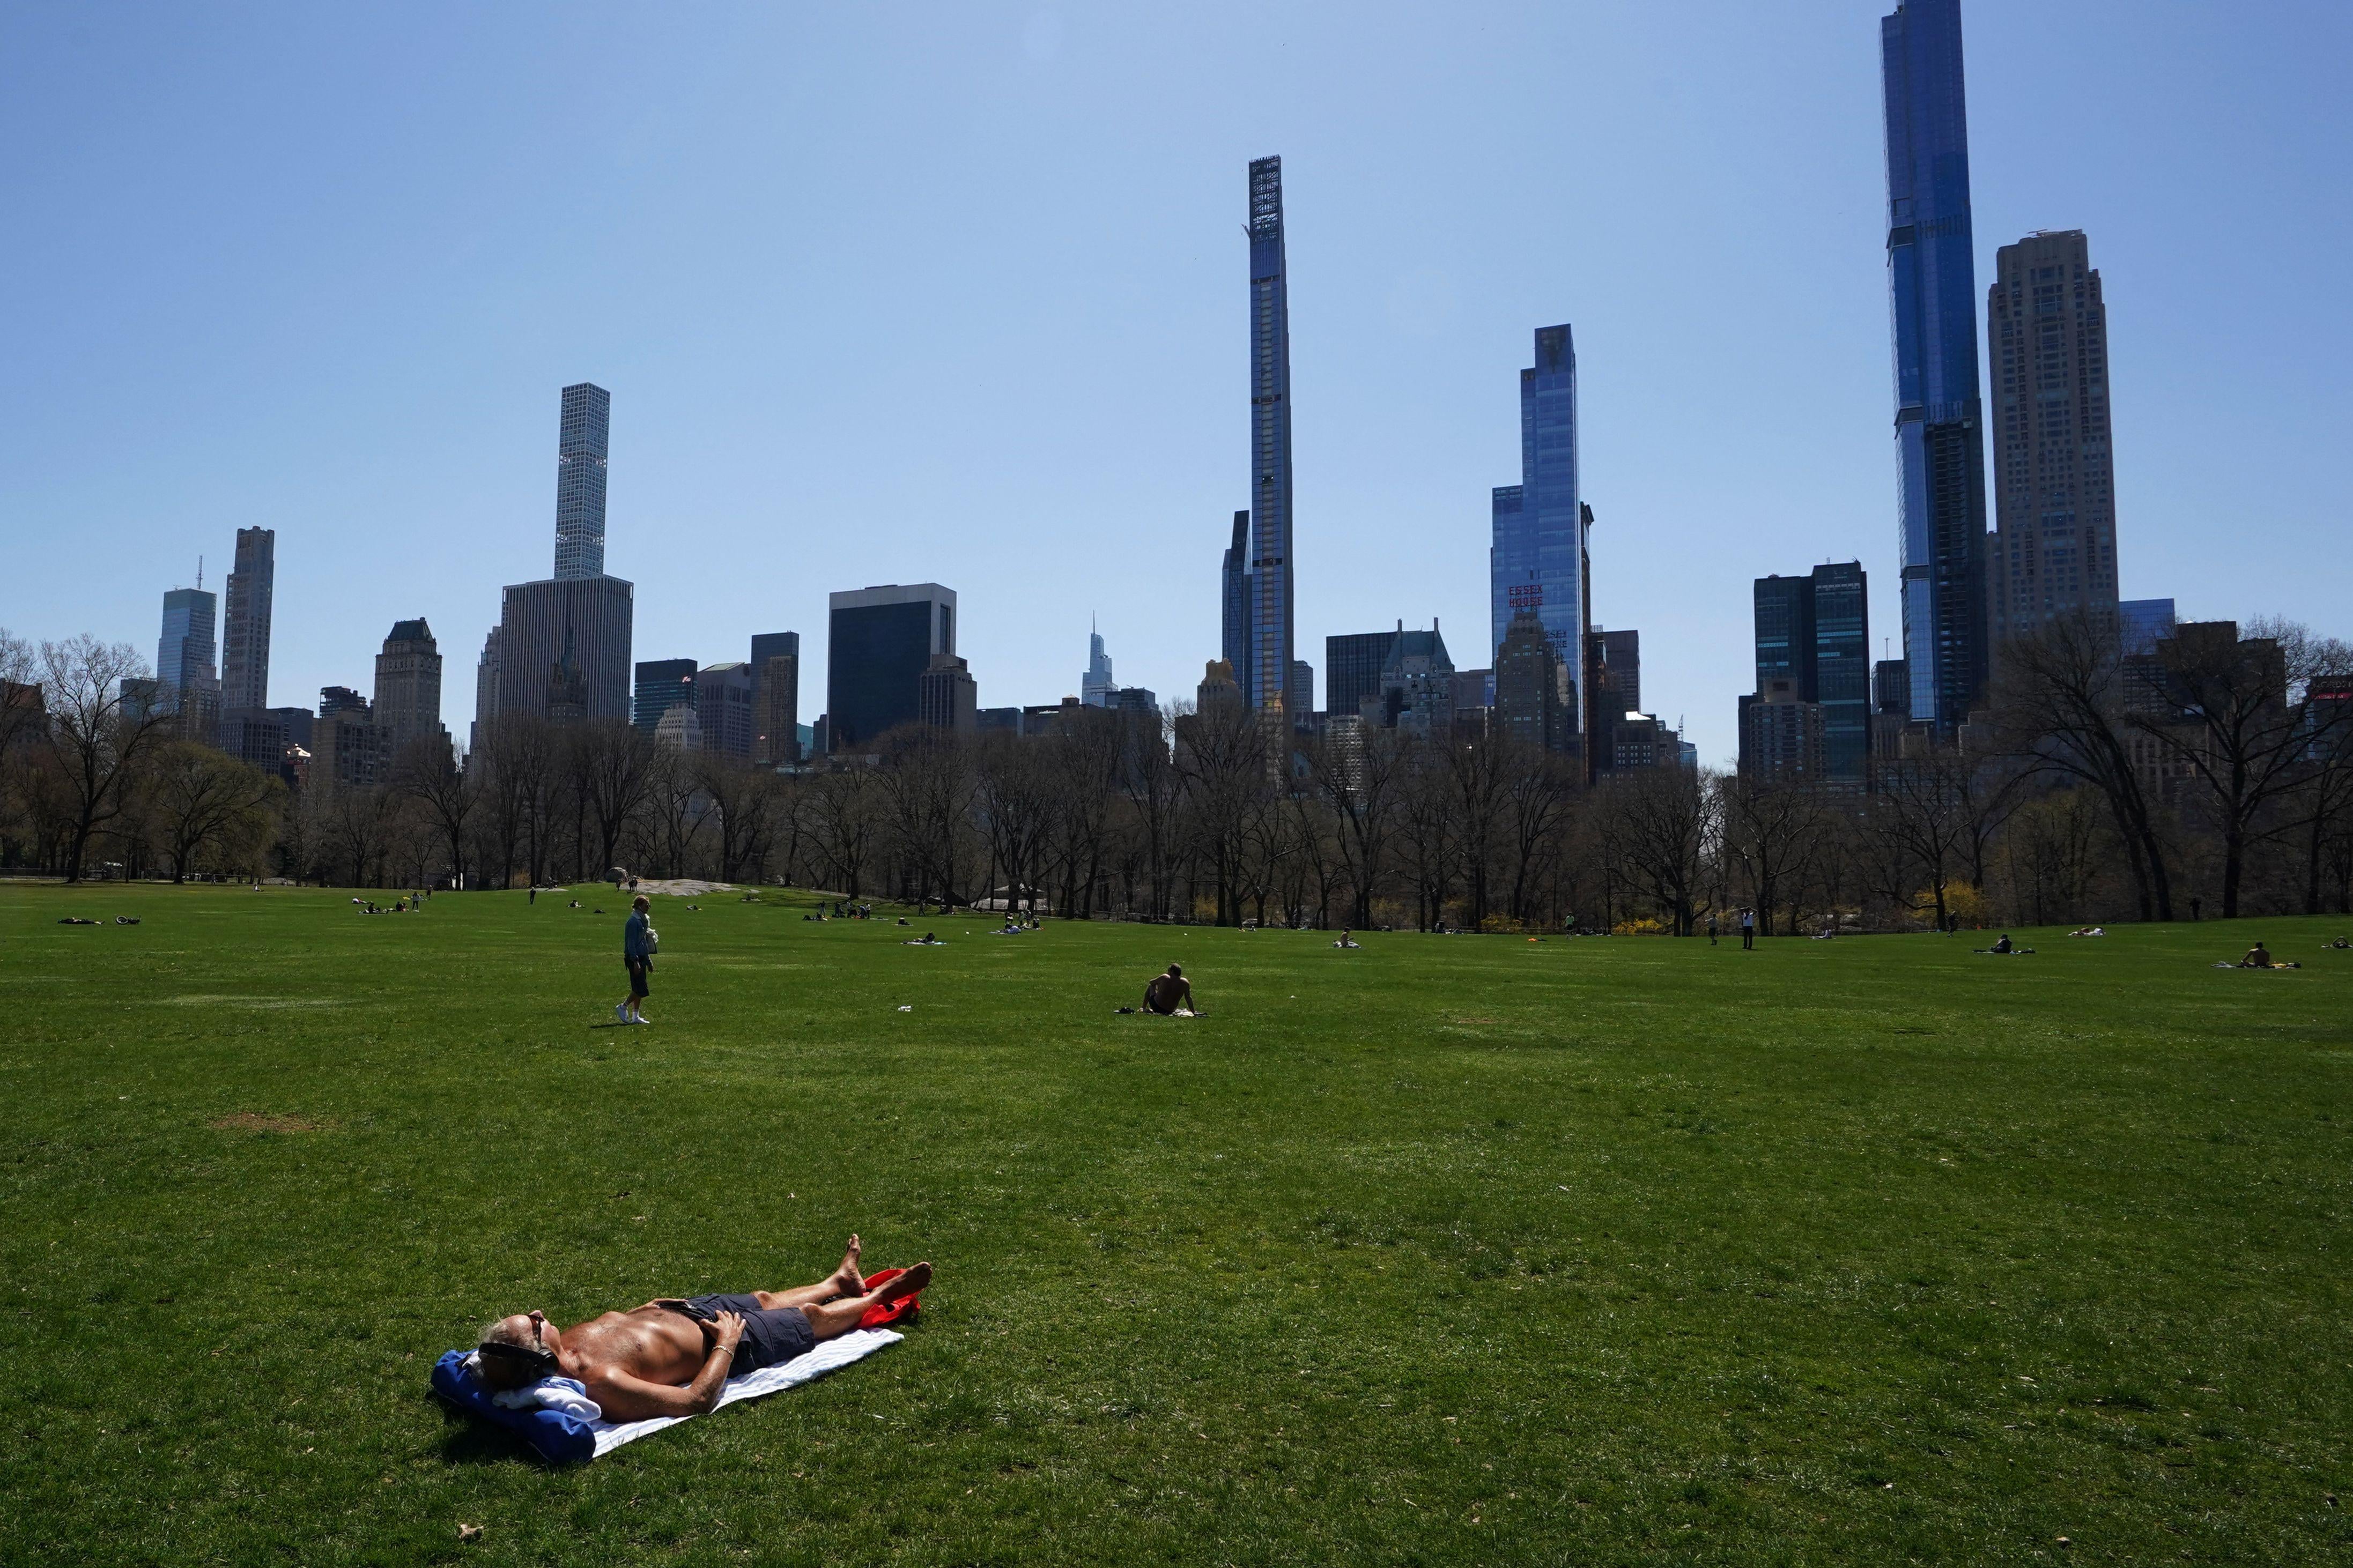 A shirtless man lays alone, far away from anyone else, on the grass in the meadow of Central Park.